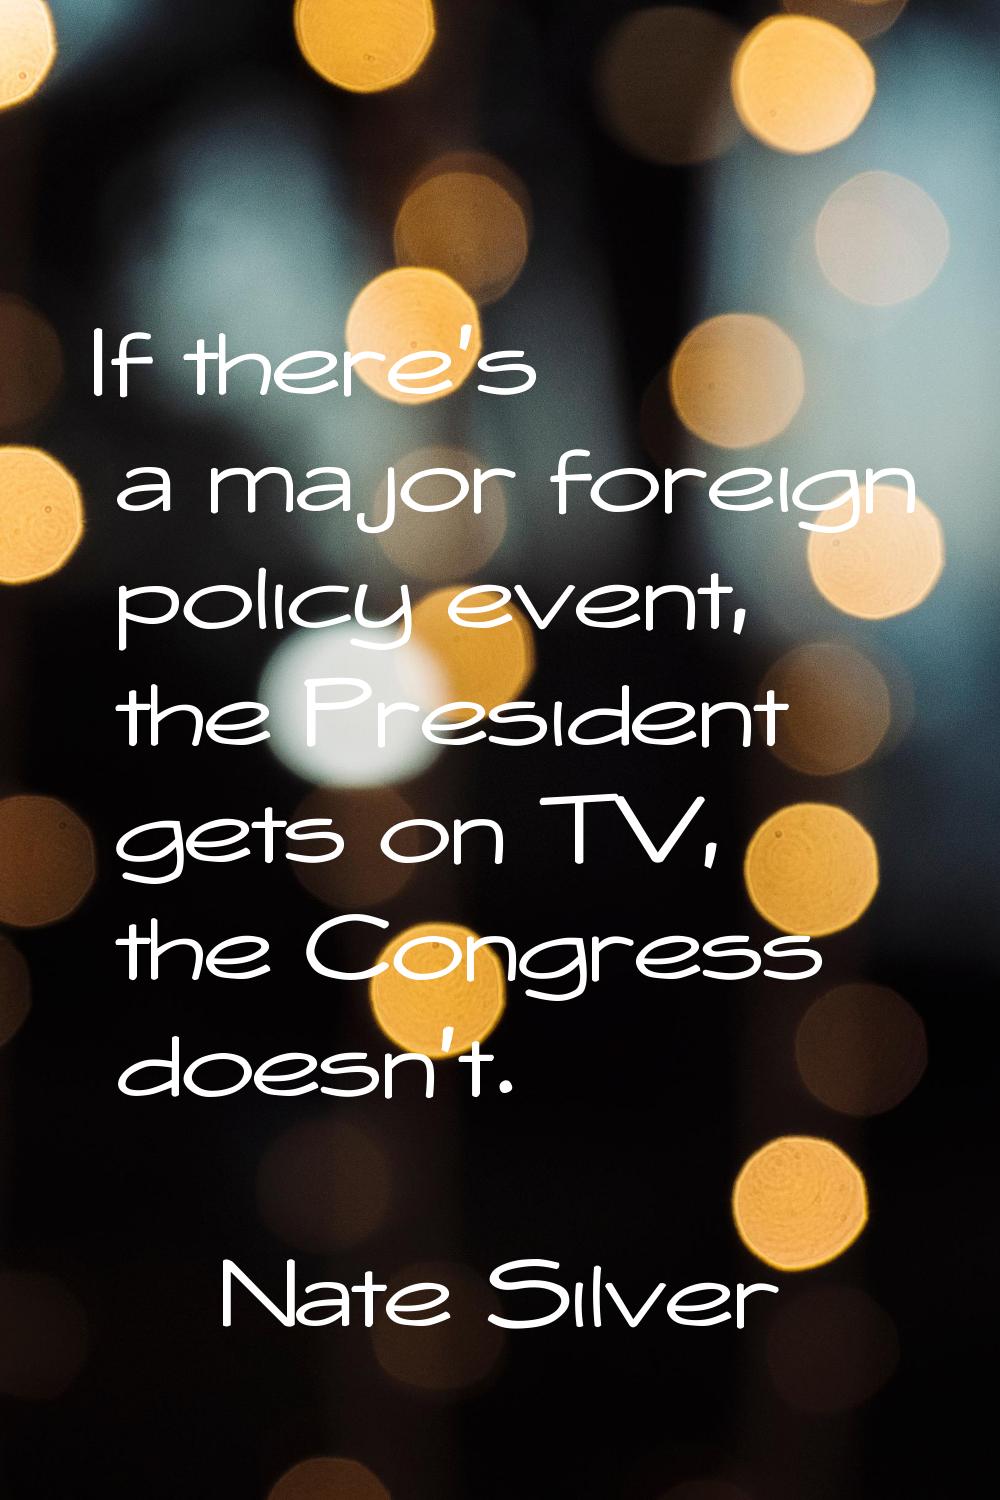 If there's a major foreign policy event, the President gets on TV, the Congress doesn't.